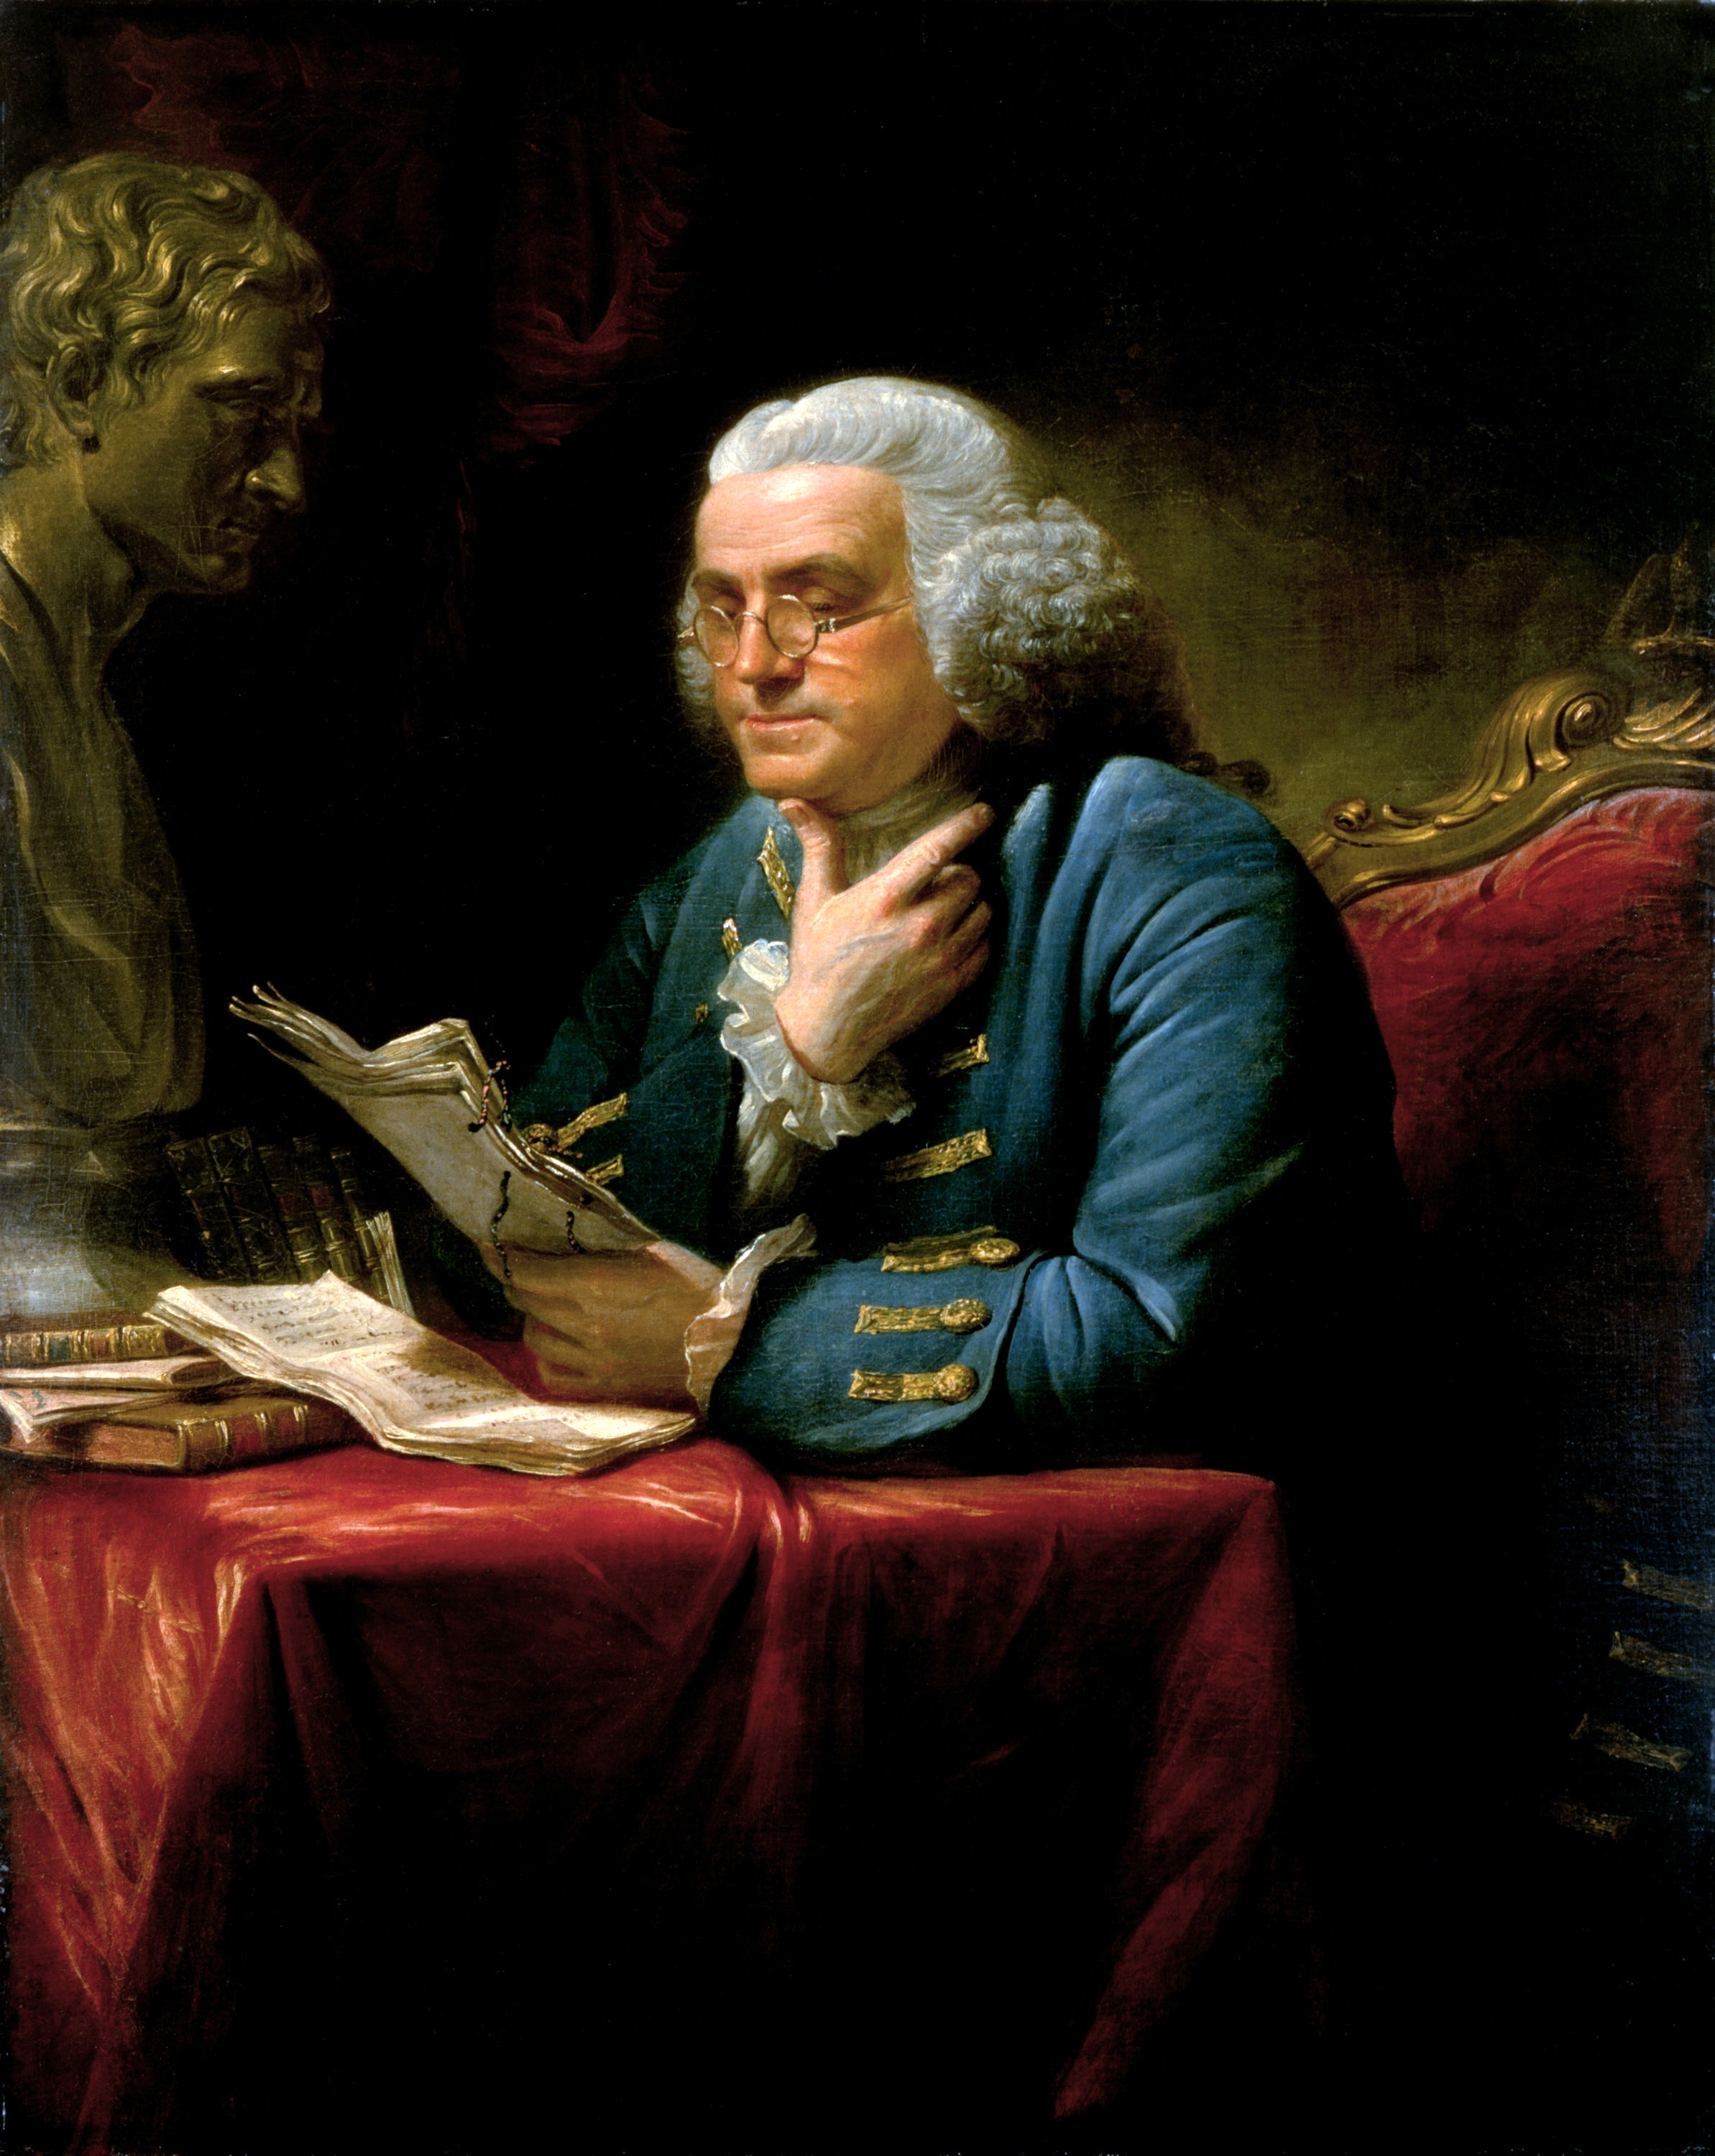 Portrait of Benjamin Franklin by David Martin brushes (in English), 1767, kept in the White House, Washington.